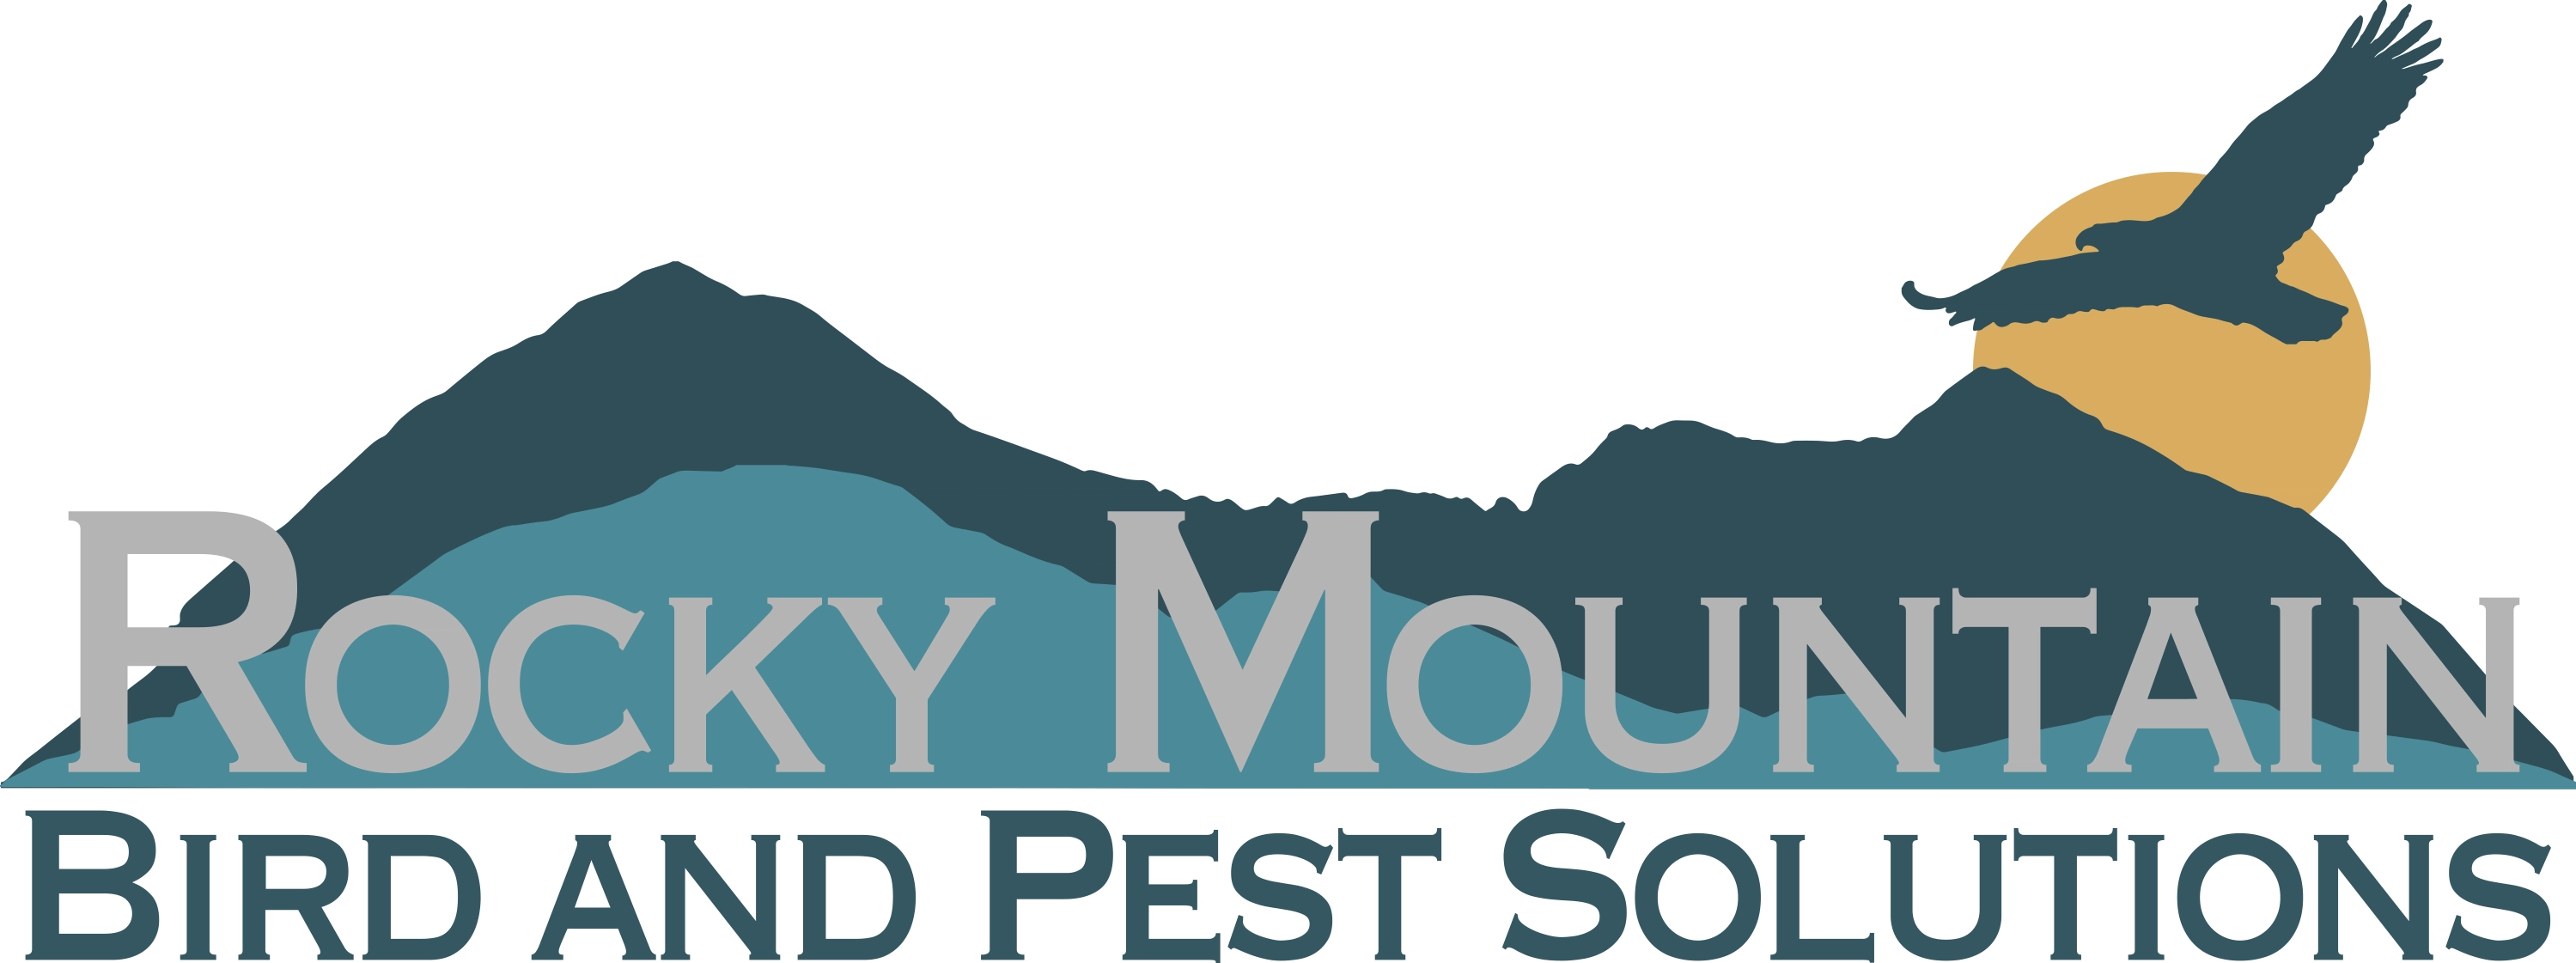 Rocky Mountain Bird and Pest Solutions Logo